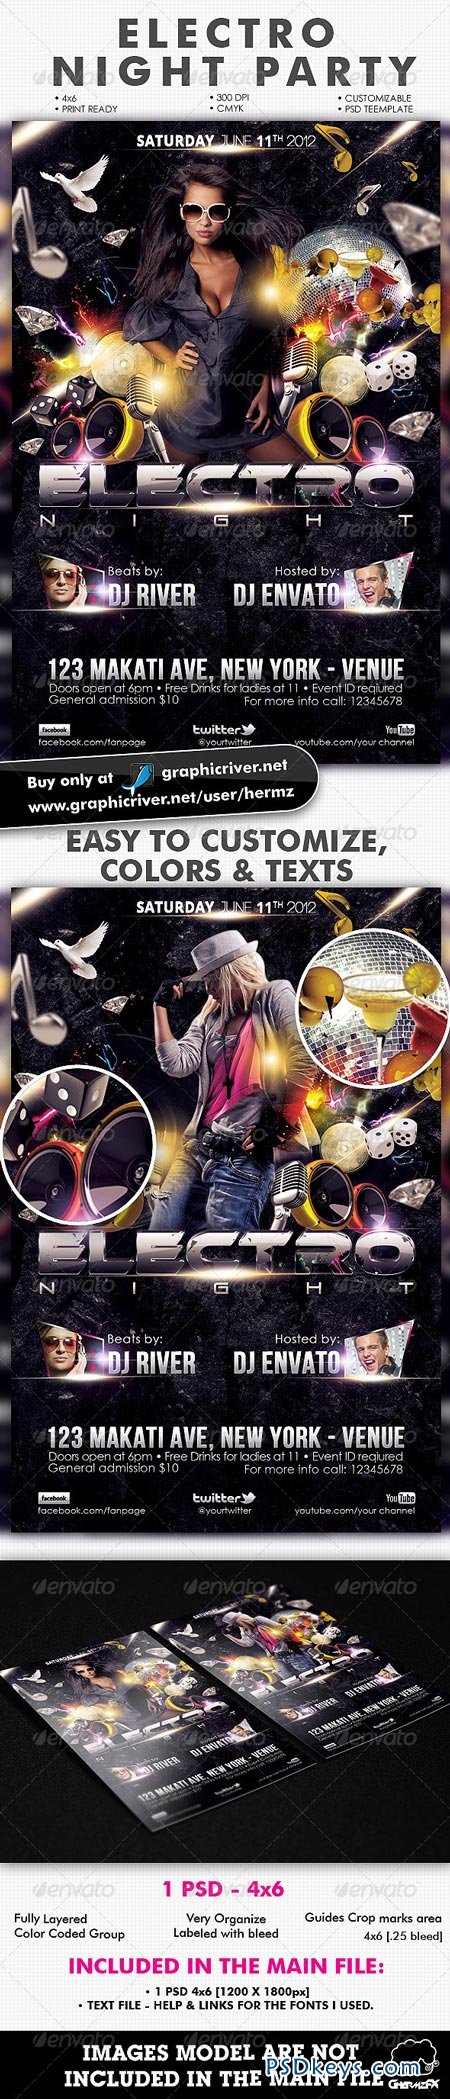 Electro Nights Flyer Template 2464215